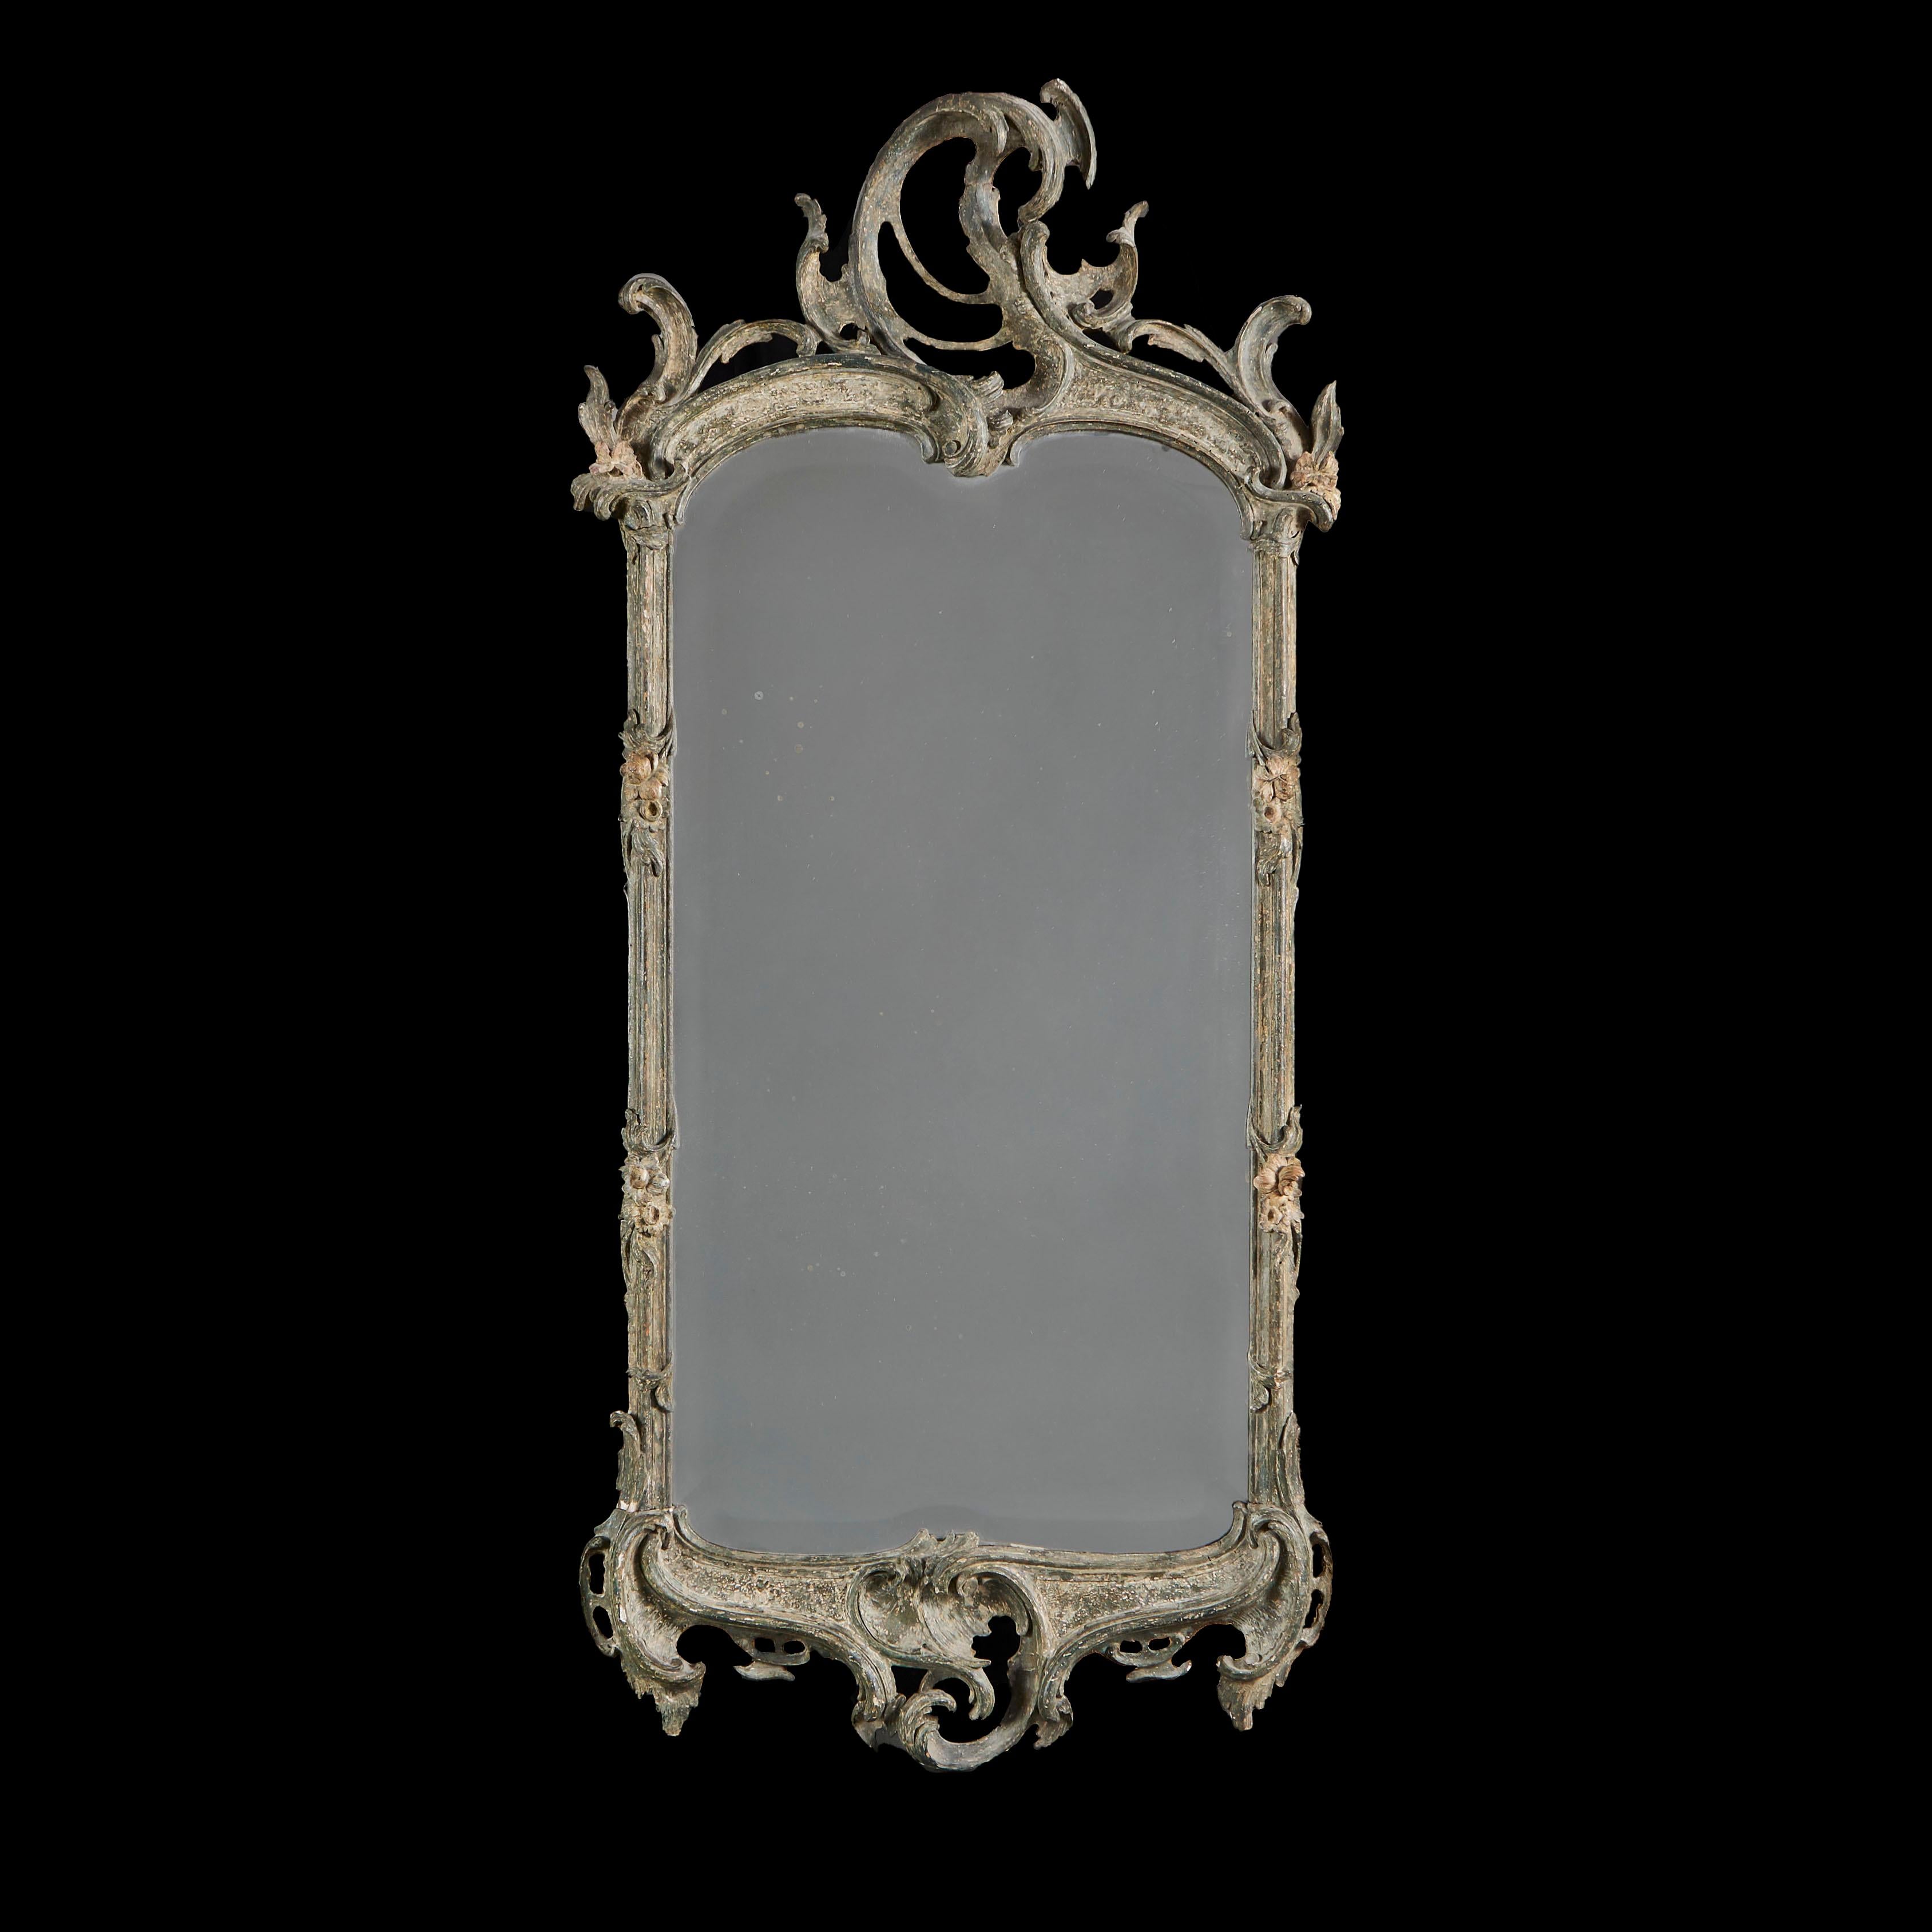 France, circa 1780

A late eighteenth century painted Rococo pier mirror retaining a bevelled plate, with mannered pierced C scroll to the cresting, the frame carved with paterae. The frame dry scraped to reveal the original blue colour painted